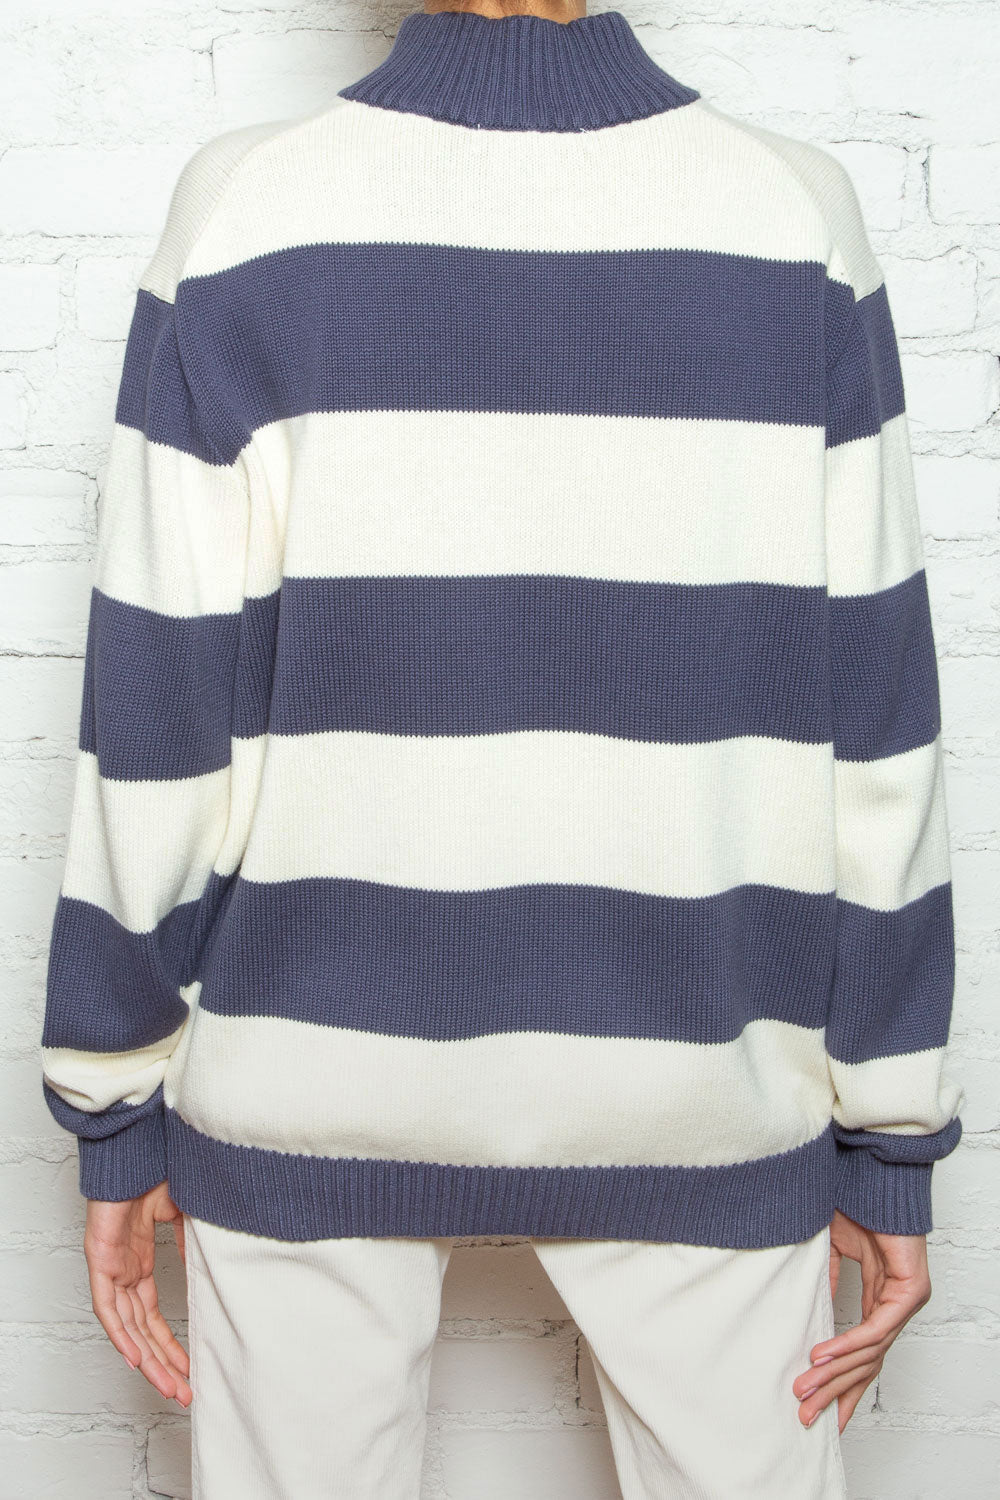 Ivory with Blue Stripes / Regular Fit